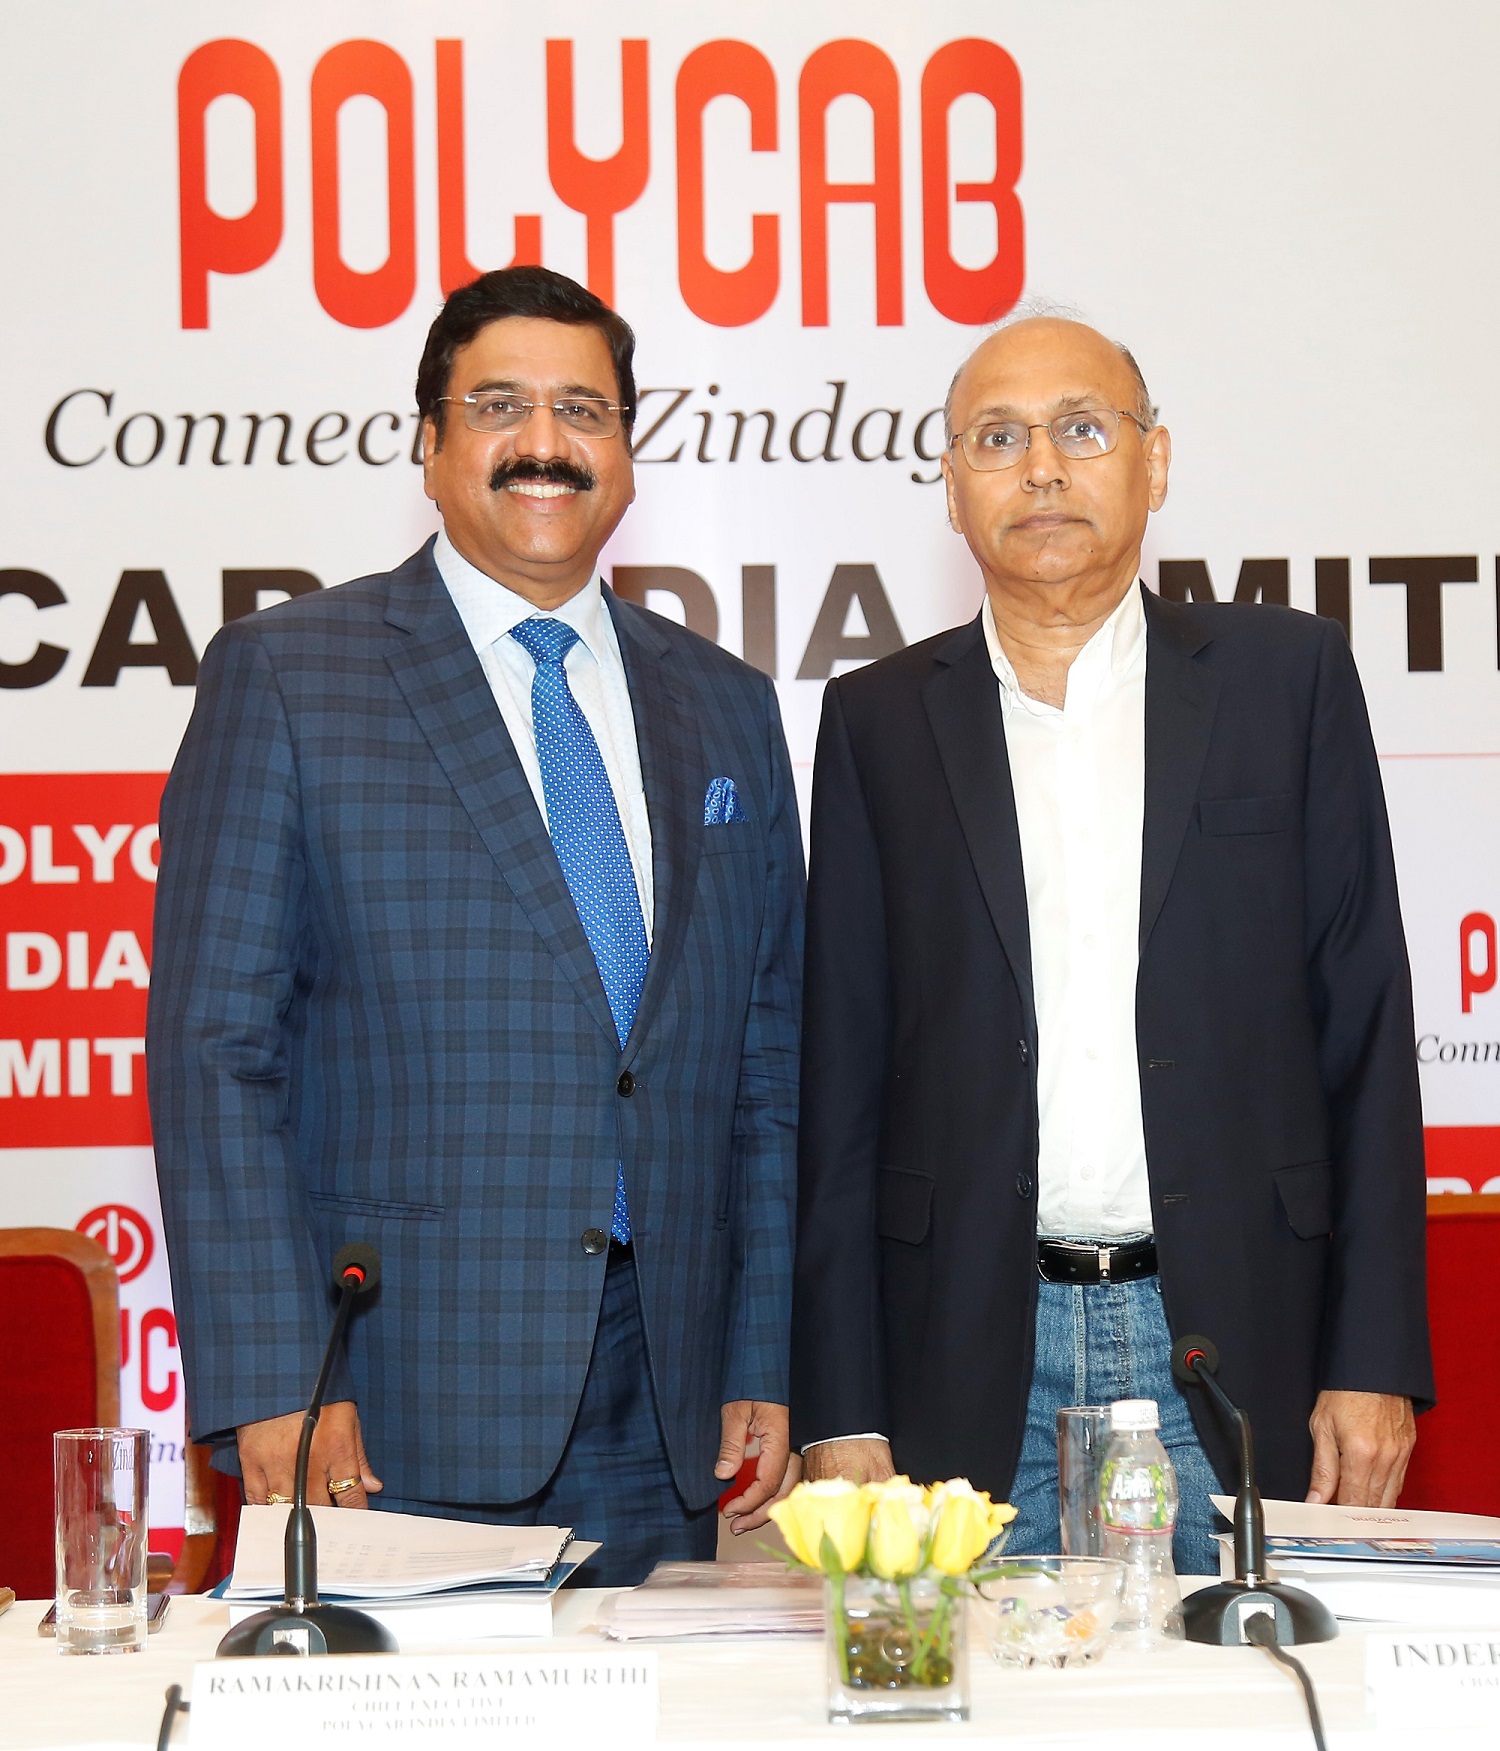 (L-R) – Mr. Ramakrishnan Ramamurthi (Chief Executive) and Mr. Inder T. Jaisinghani (Chairman and Managing Director) from Polycab India Ltd at the press conference in Mumbai to announce the company's forthcoming IPO.- Photo By Sachin Murdeshwar GPN News Network 